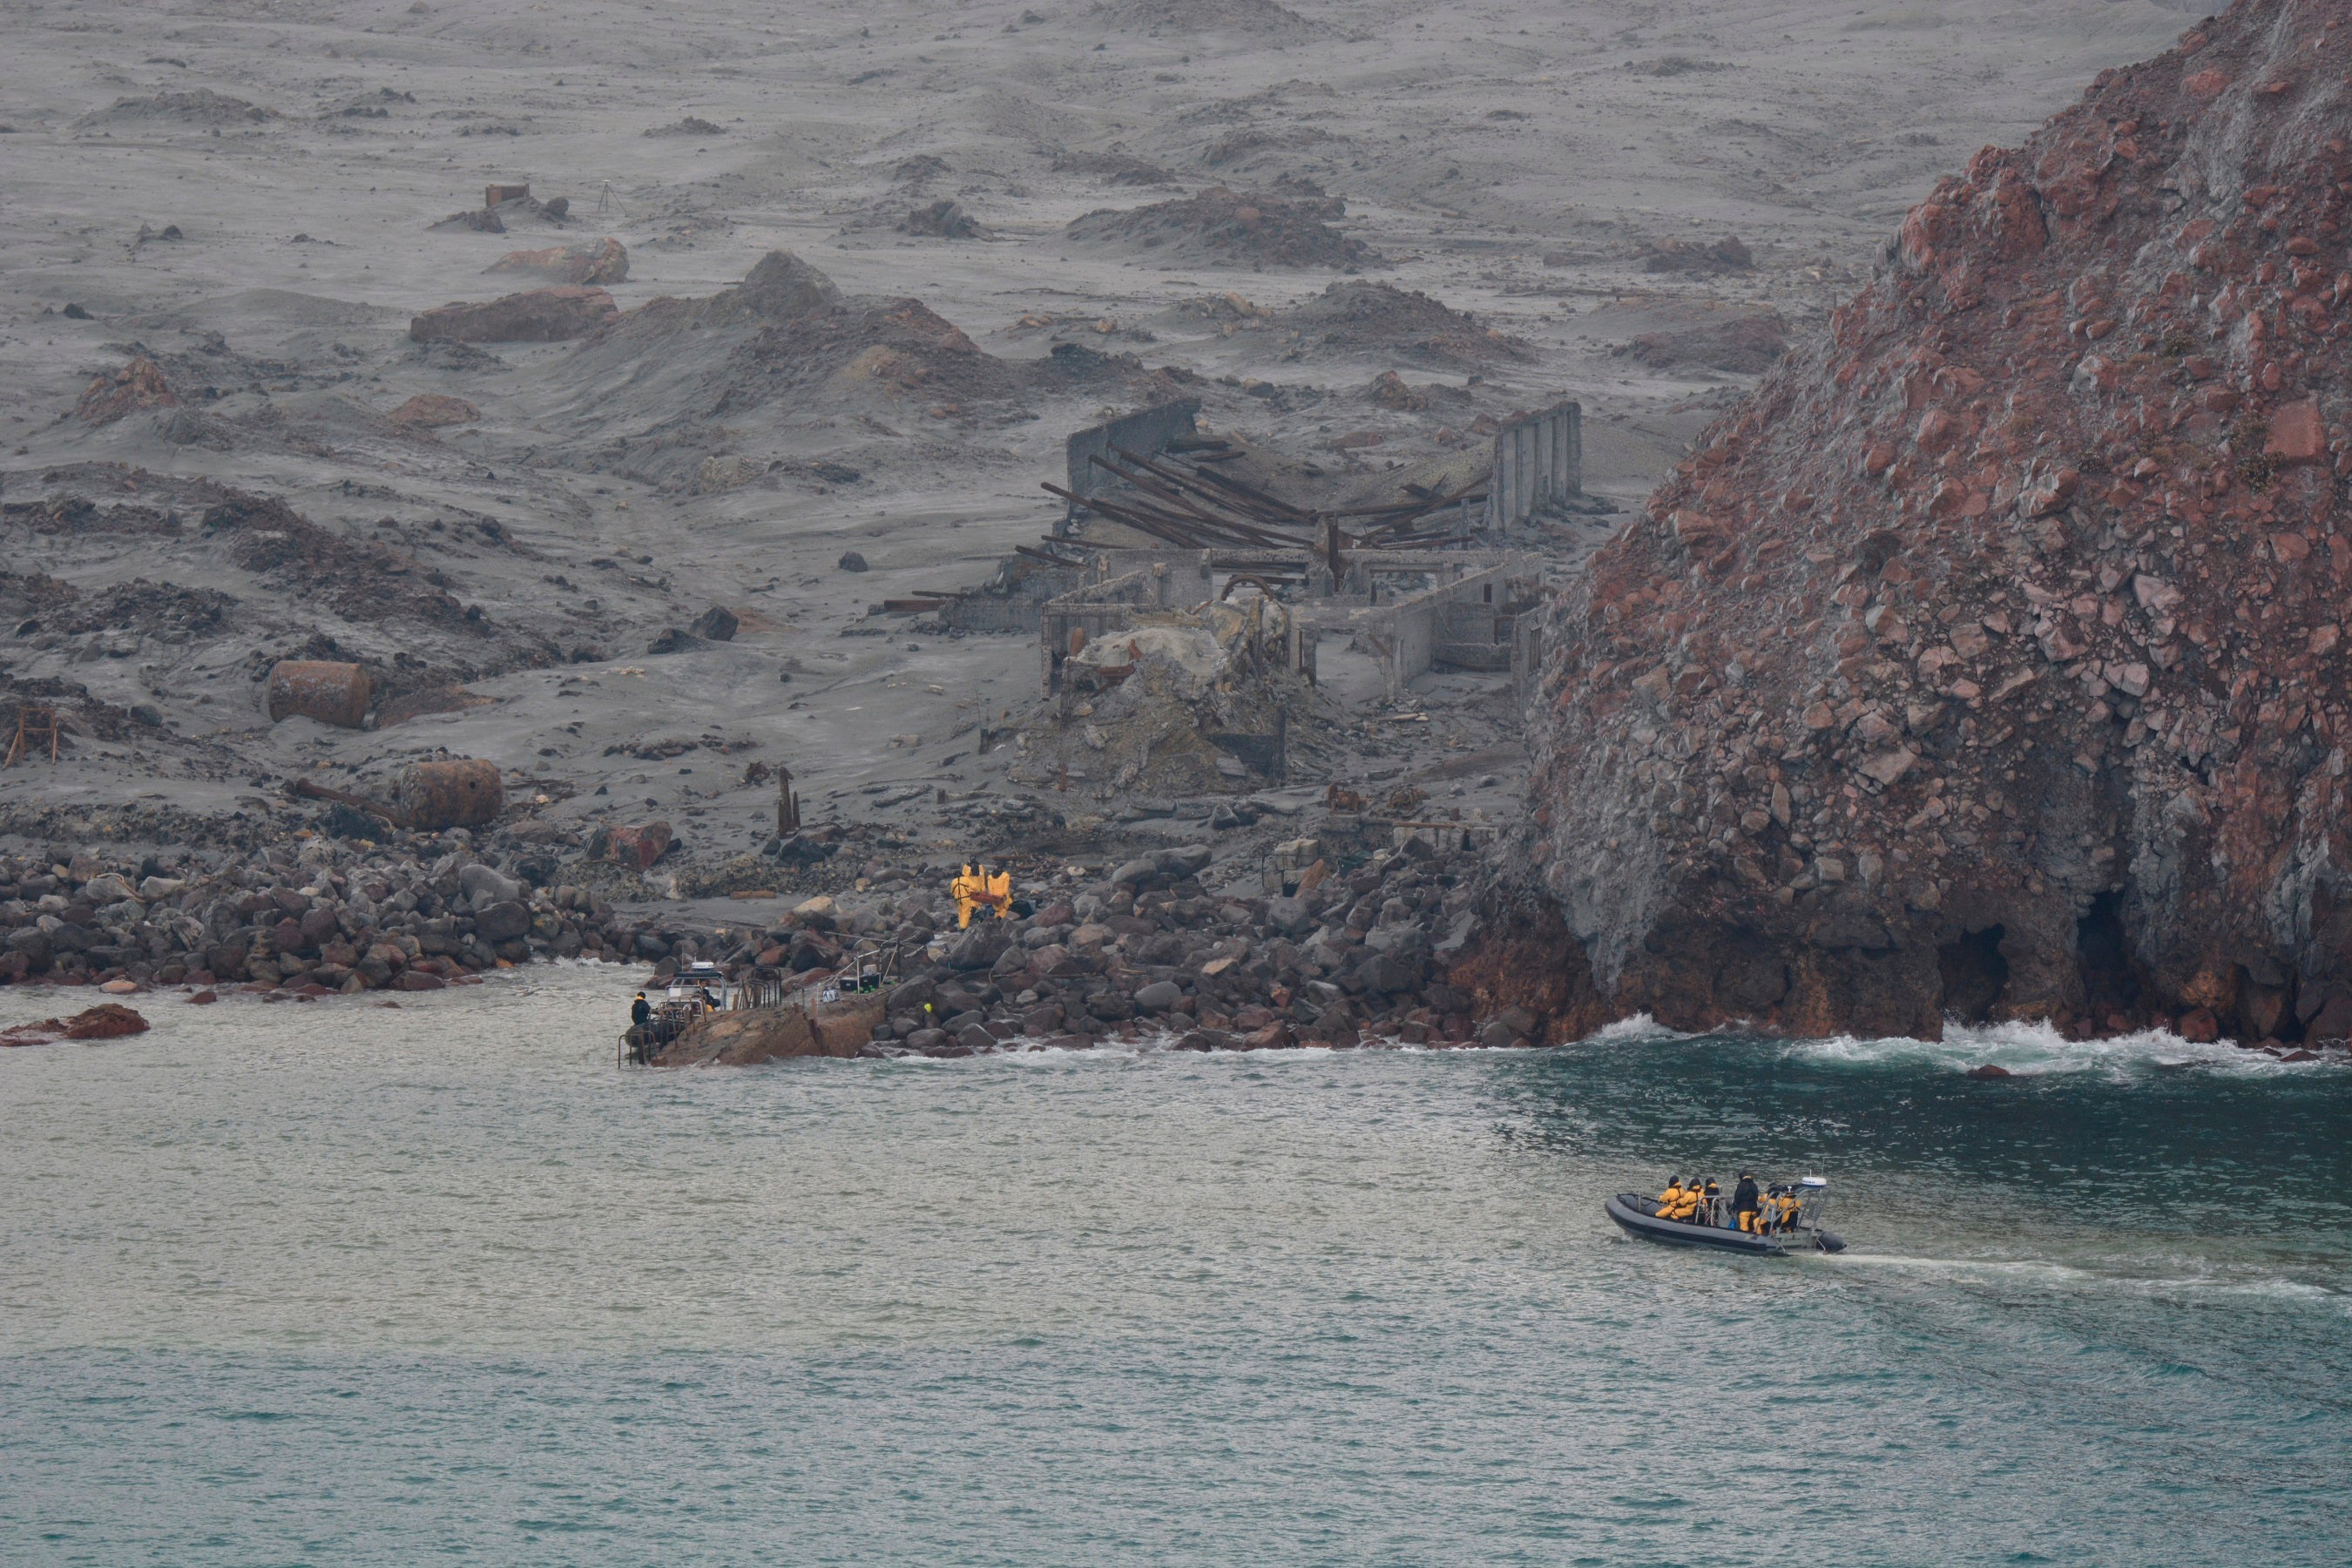 File In this photo provided by the New Zealand Defence Force emergency workers recover bodies from White Island in 2019, after a volcanic eruption in Whakatane